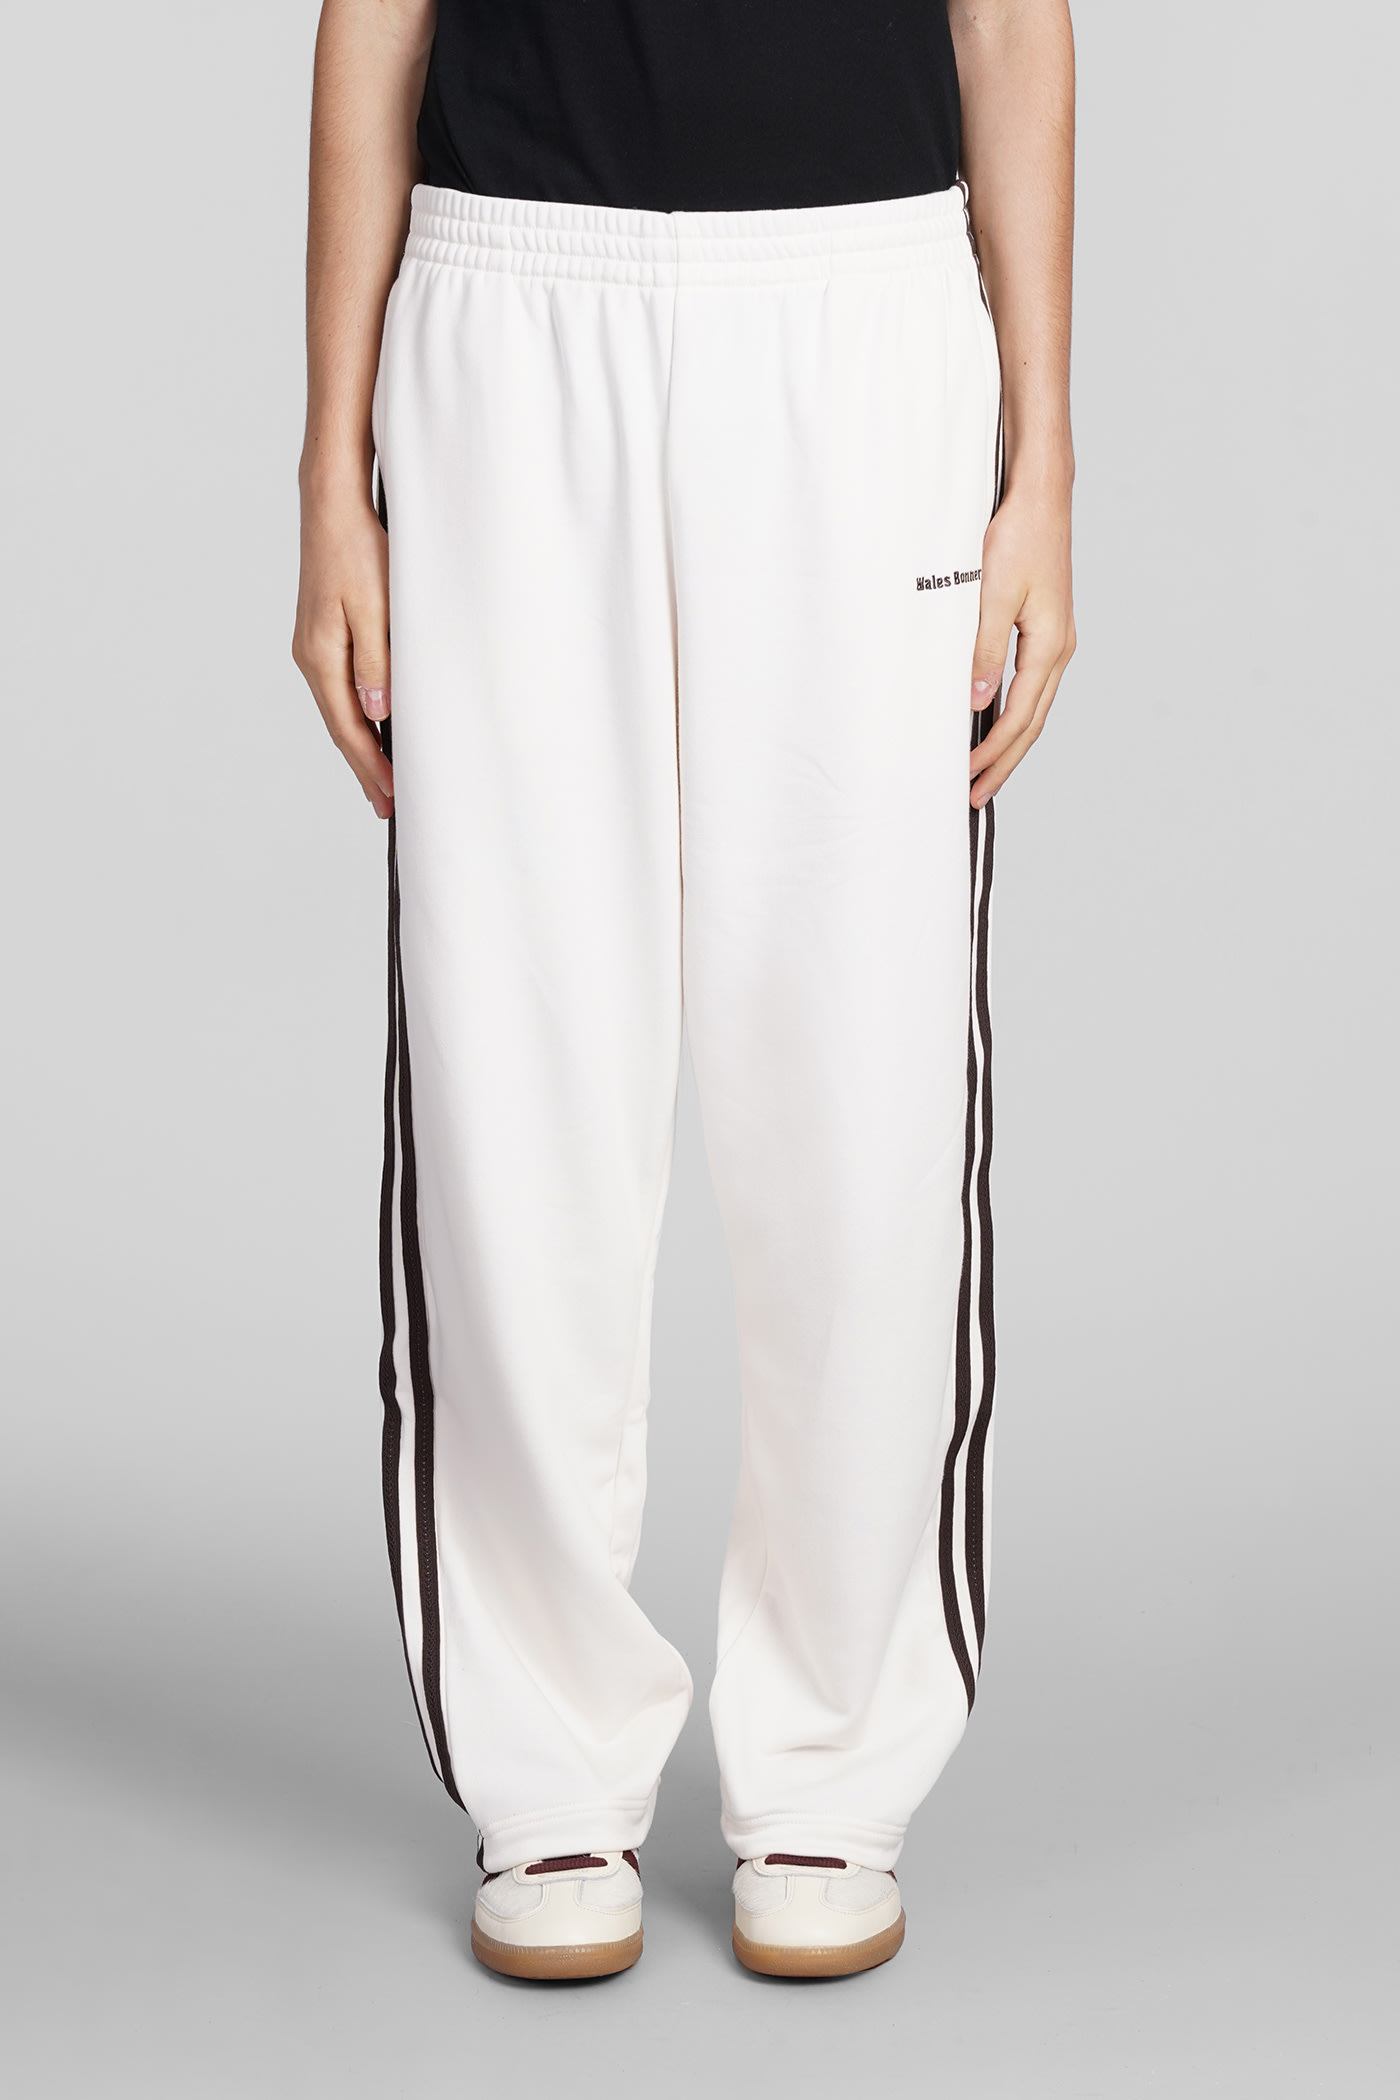 ADIDAS ORIGINALS BY WALES BONNER PANTS IN WHITE COTTON